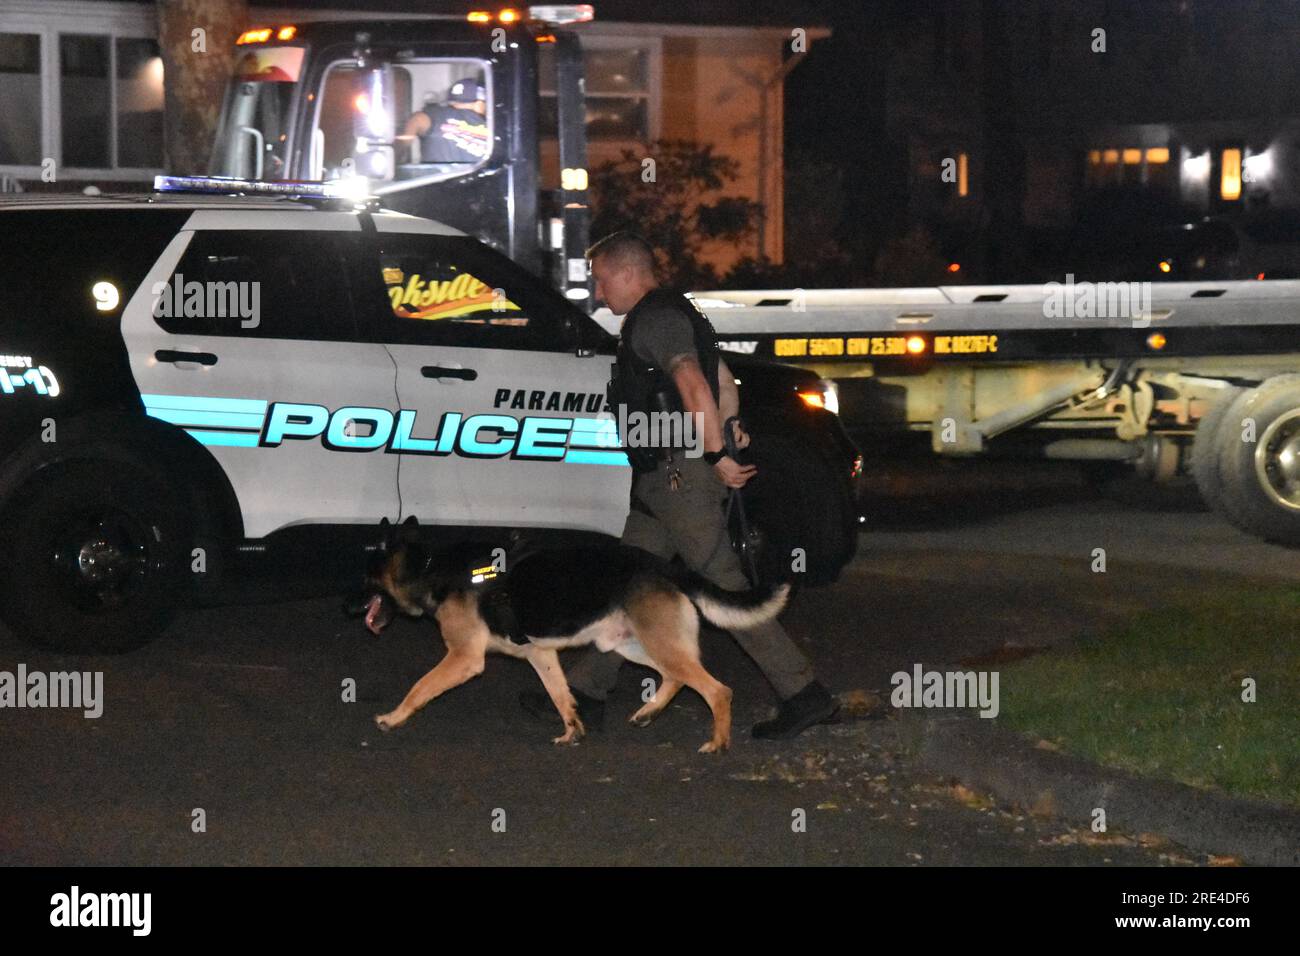 Paramus, United States. 25th July, 2023. A K-9 police dog assists in the search for the vehicle thieves. Car burglars were in the area of Ehret Street and Lawrence Drive in Paramus, New Jersey. Around 11:45 PM, Monday evening Paramus police were scouring the area for two males approximately 5'8, 140 lbs, dressed in all black. The car thieves crashed a stolen vehicle in the area of Ehret Street. Authorities had assistance from the K9 Unit of the Bergen County Sheriff's Office. The search continued into the morning hours on Tuesday. Credit: SOPA Images Limited/Alamy Live News Stock Photo